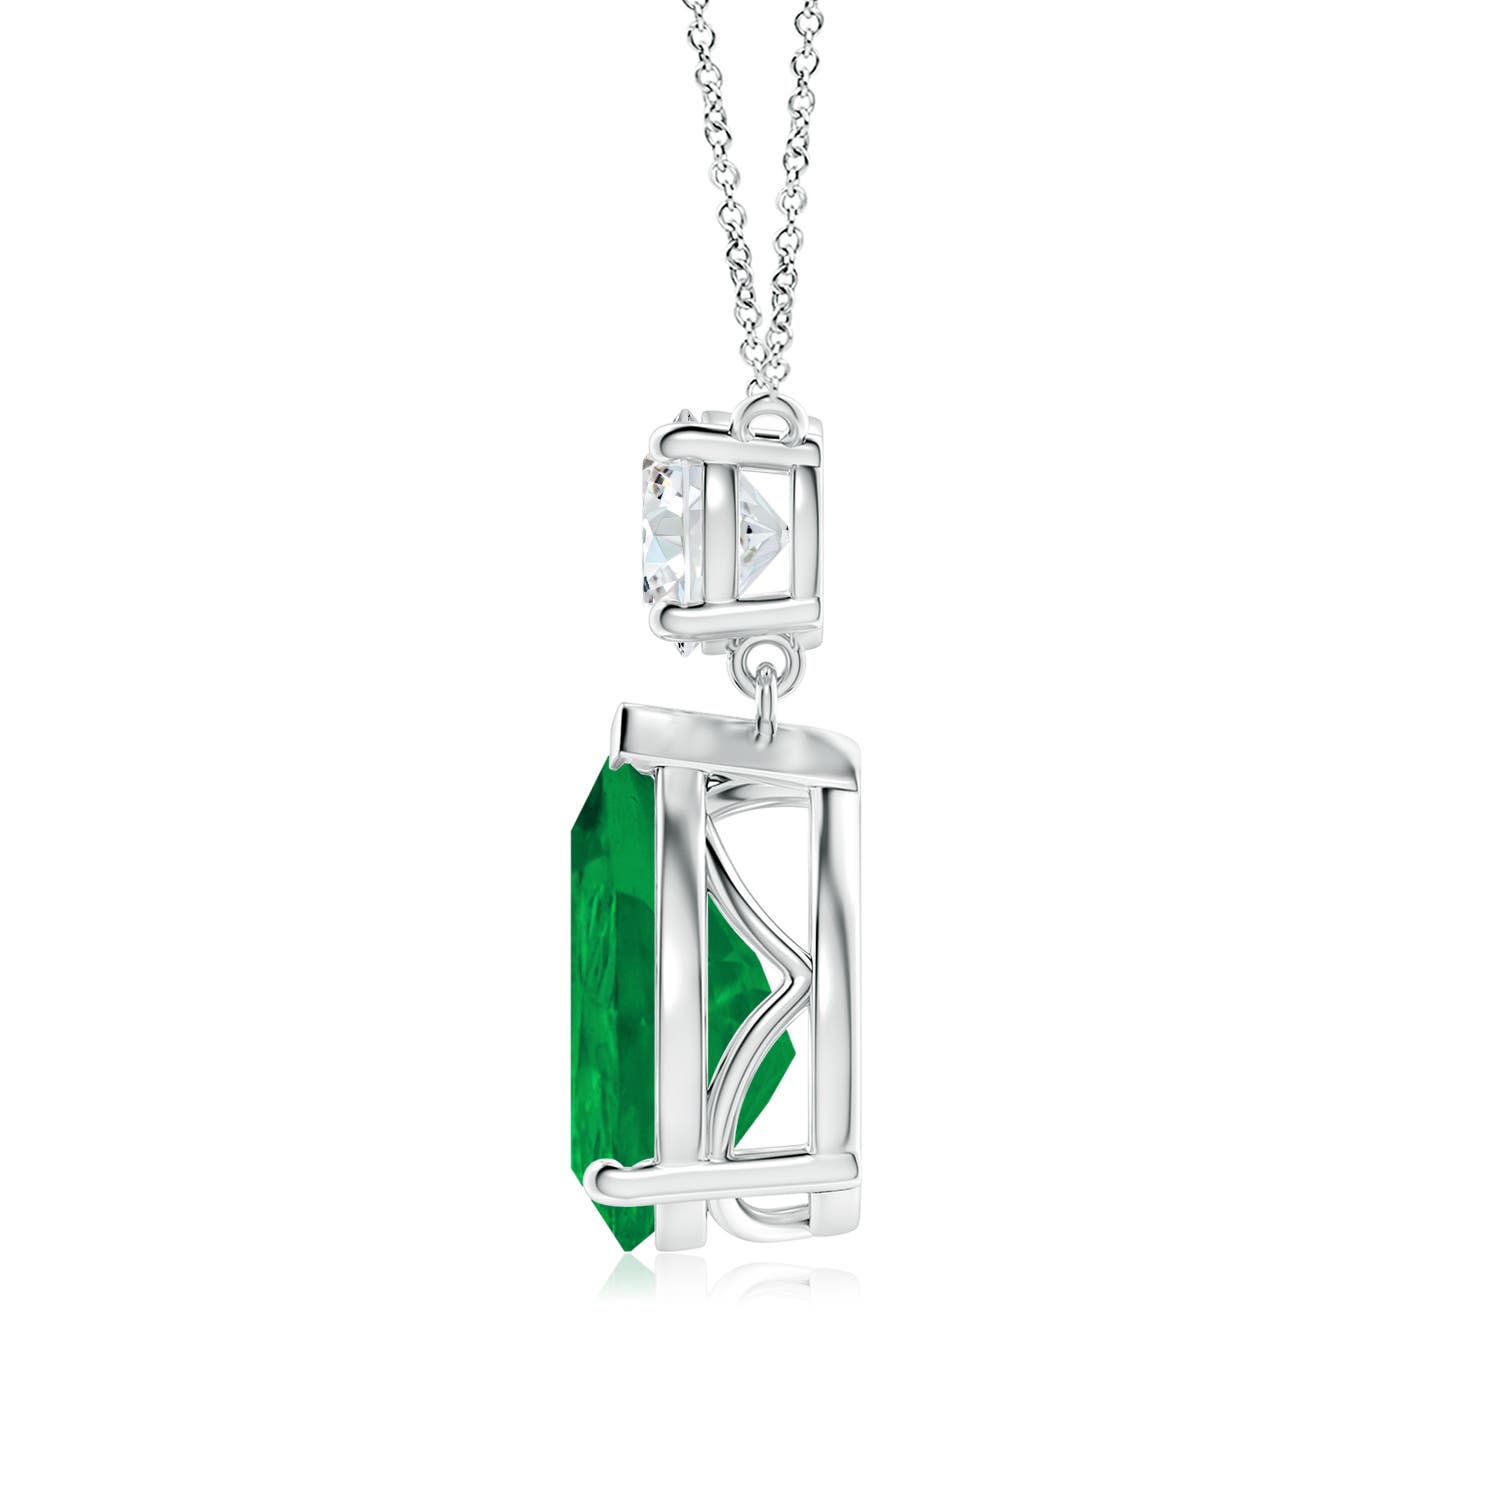 AA - Emerald / 5.21 CT / 14 KT White Gold